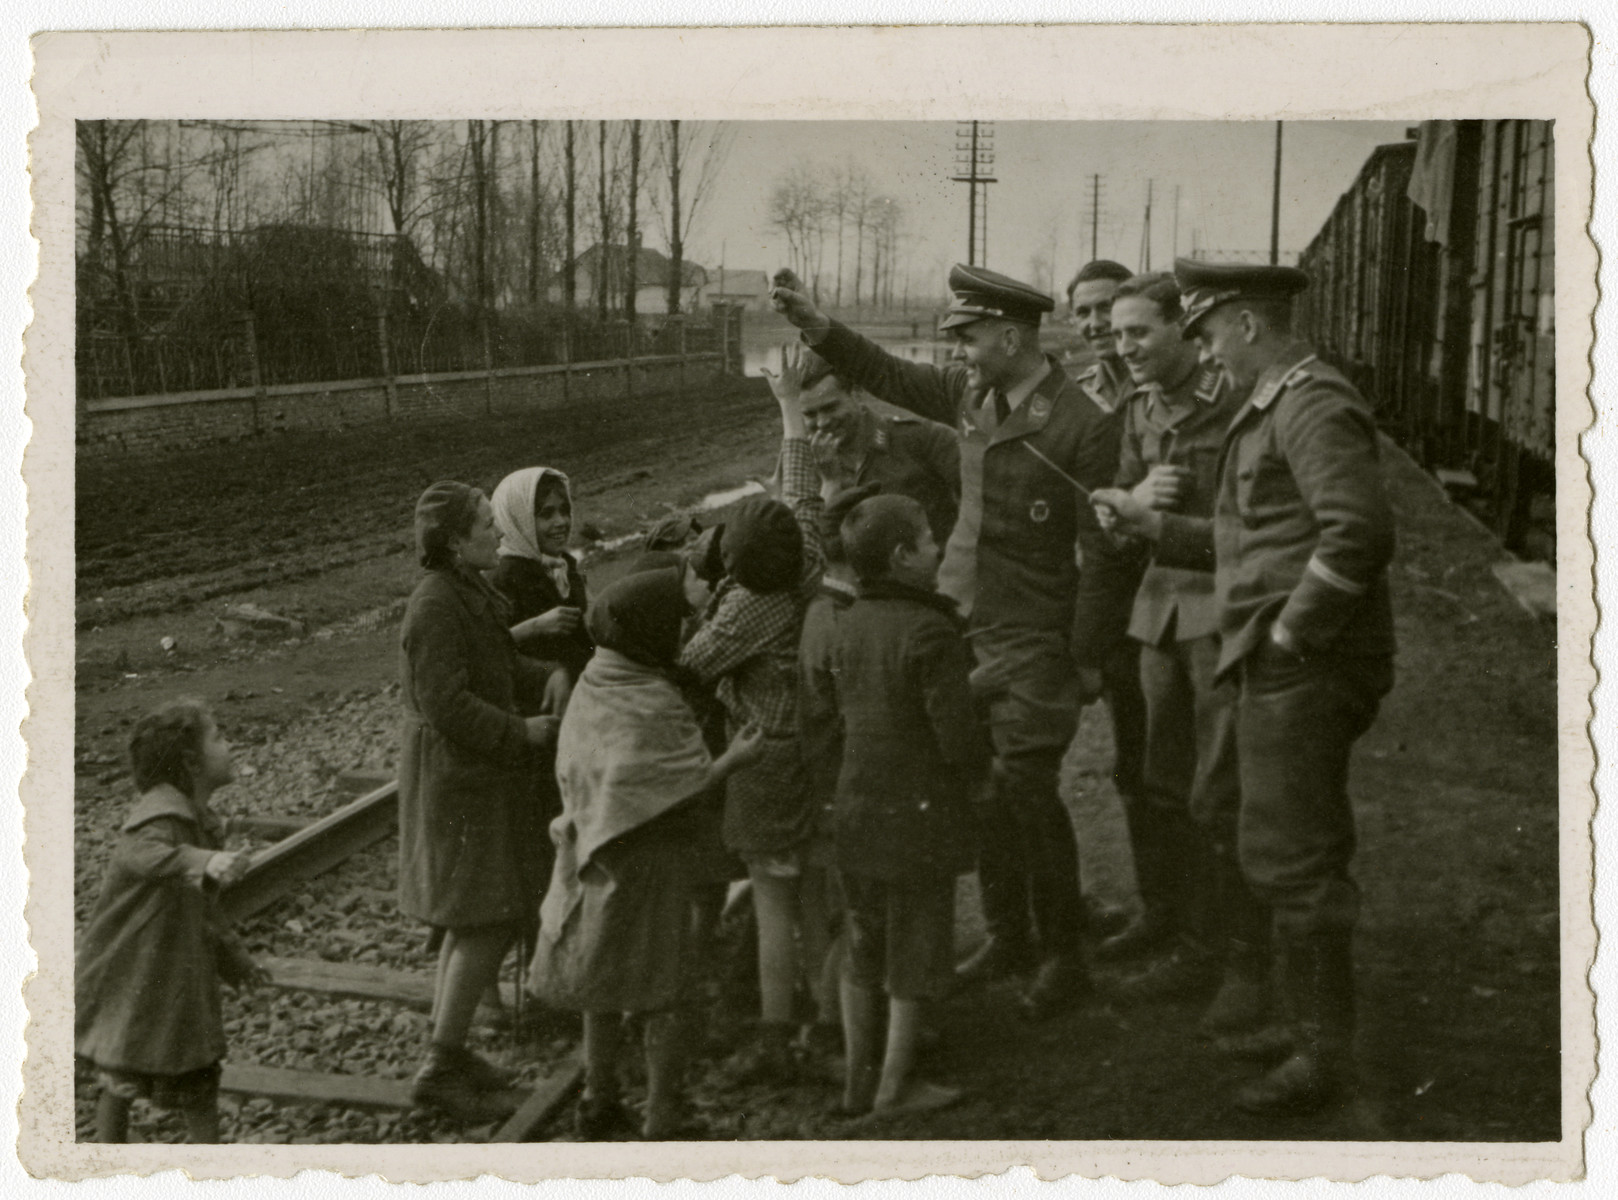 Members of the German Luftwaffe engage with local children by the tracks of an unidentified railway.

This image is one contained in an album found by Jacob Igra in an apartment in Sosnowiec after the war. Many of the photographs are believed to have been taken by a soldier with the SD-SIPO (Sicherheitspolizei) following the invasion of Poland in 1939. Additional photographs depict einsatzgruppen activities at sites throughout Nazi occupied Eastern Europe and may have been later additions to the album.